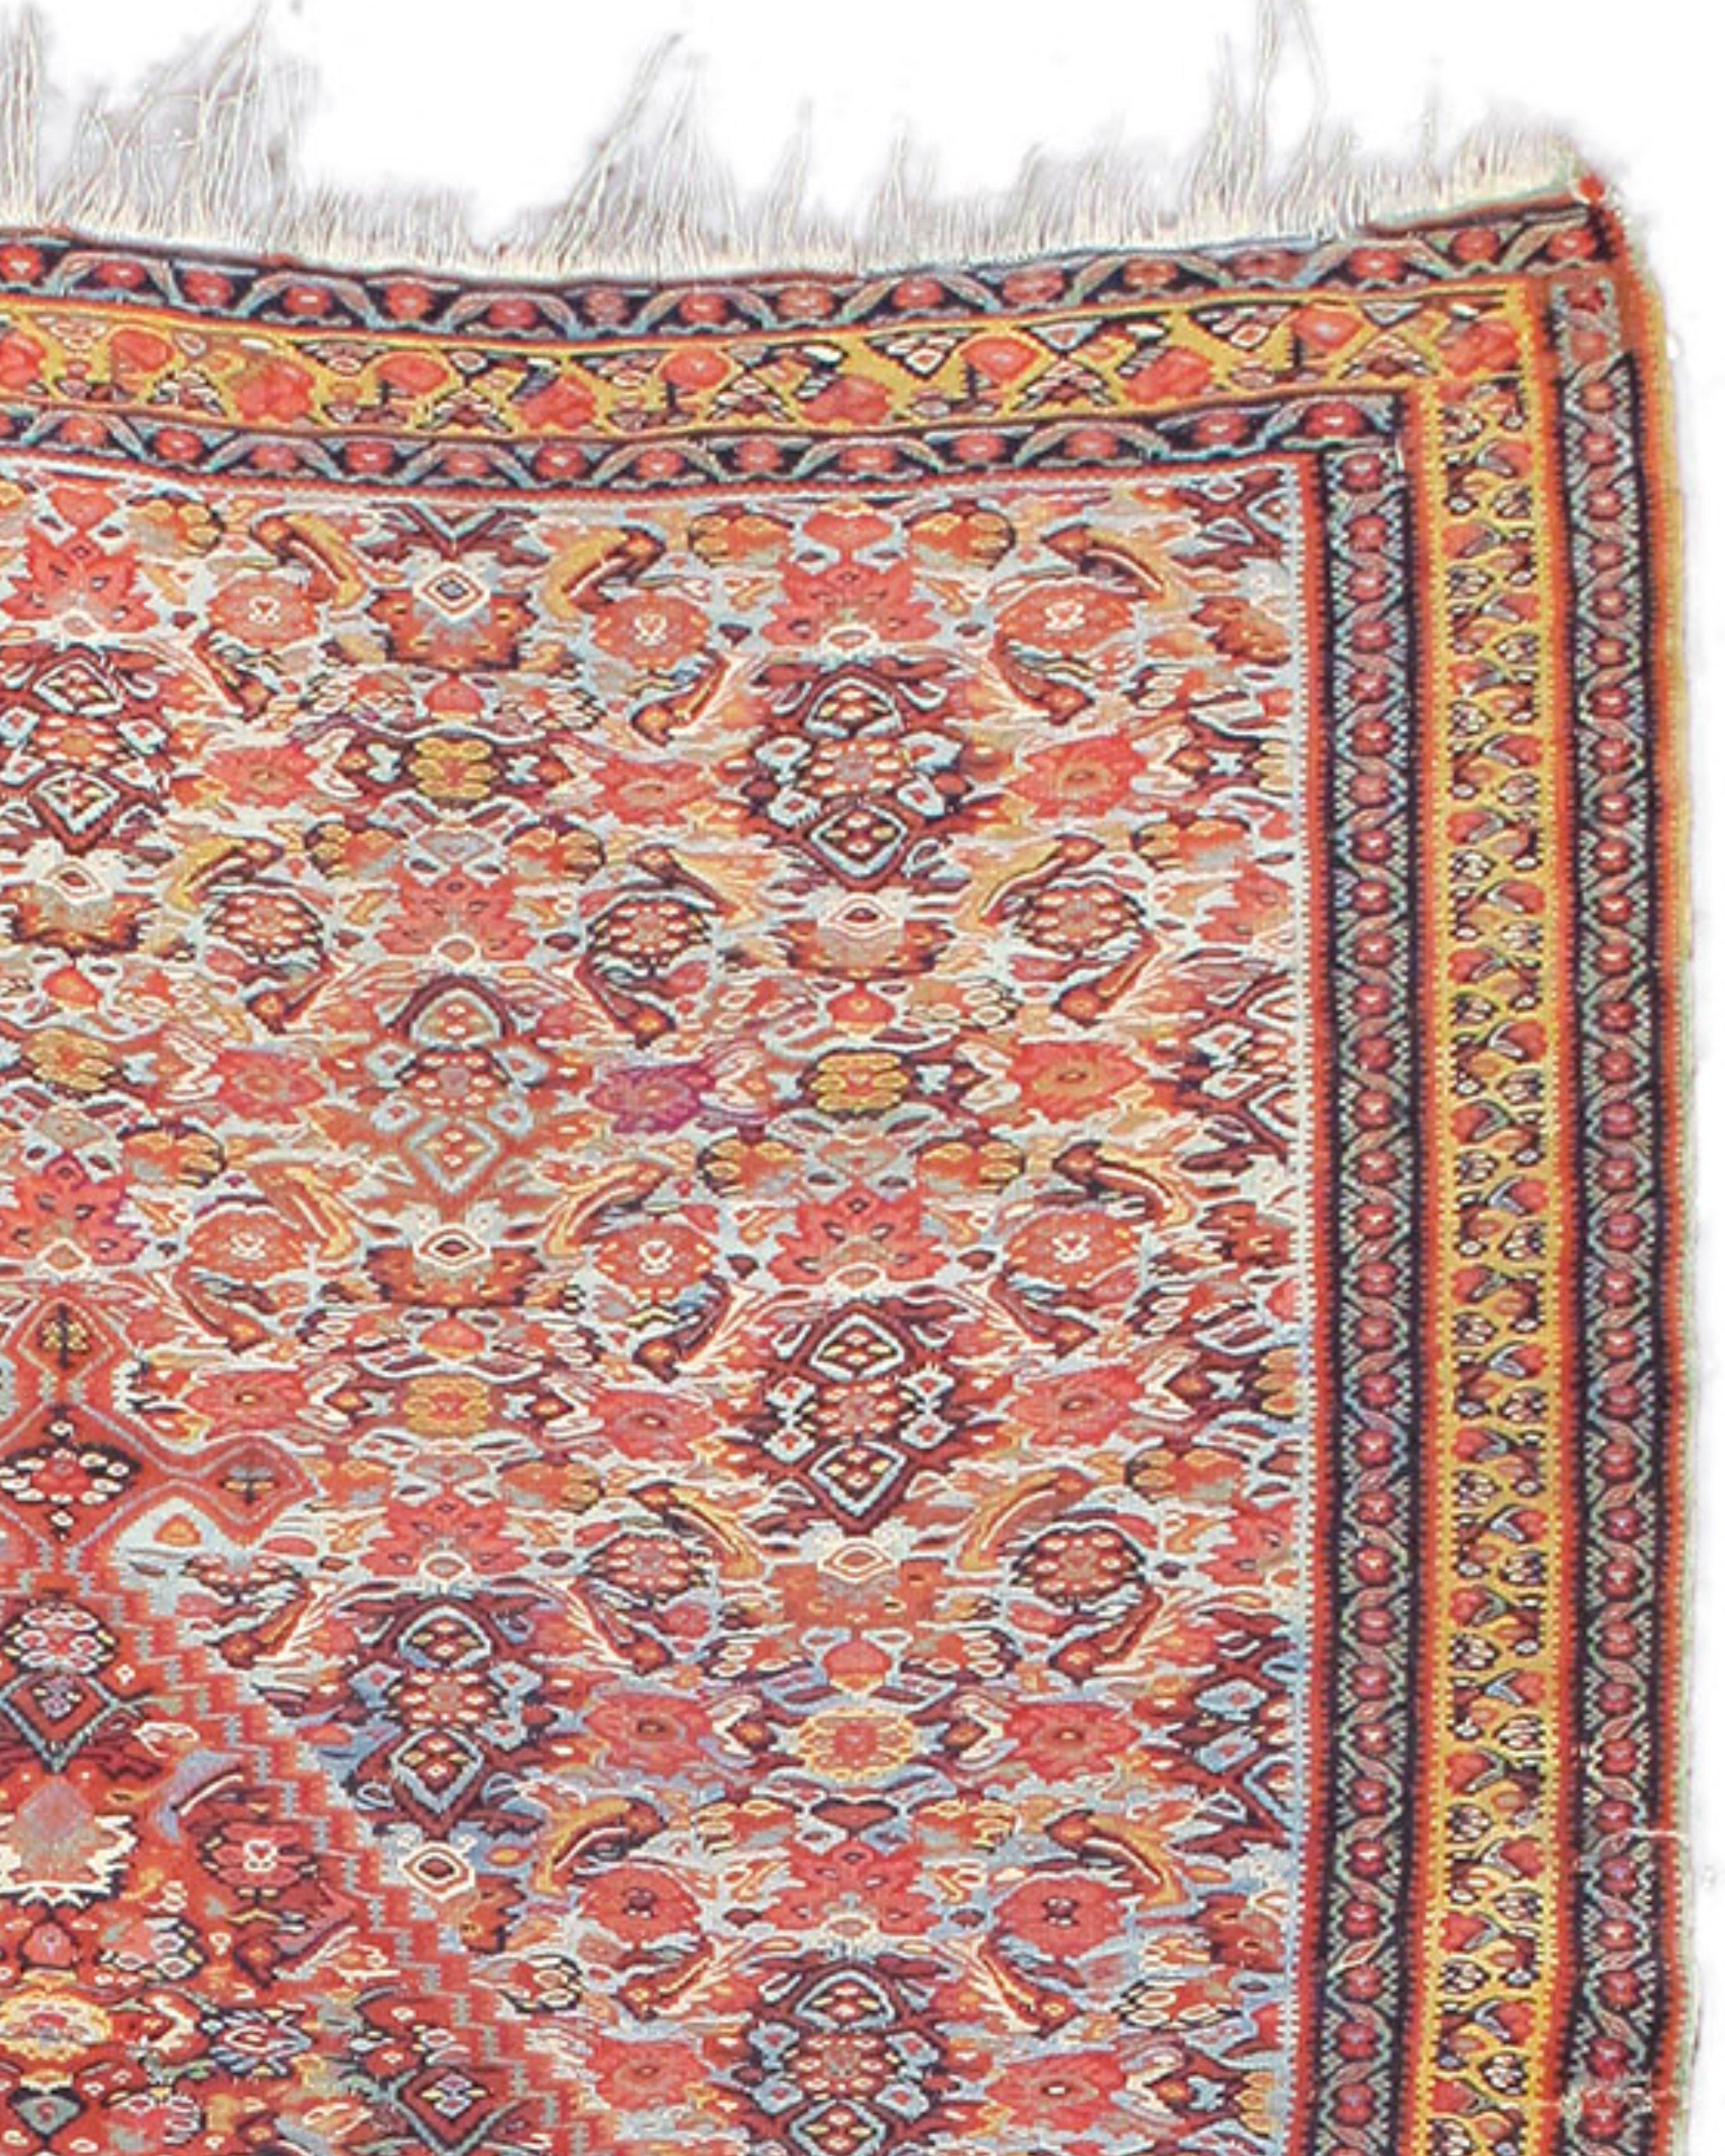 Antique Persia Senneh Kilim Rug, Late 19th Century

Additional Information:
Dimensions: 6'6